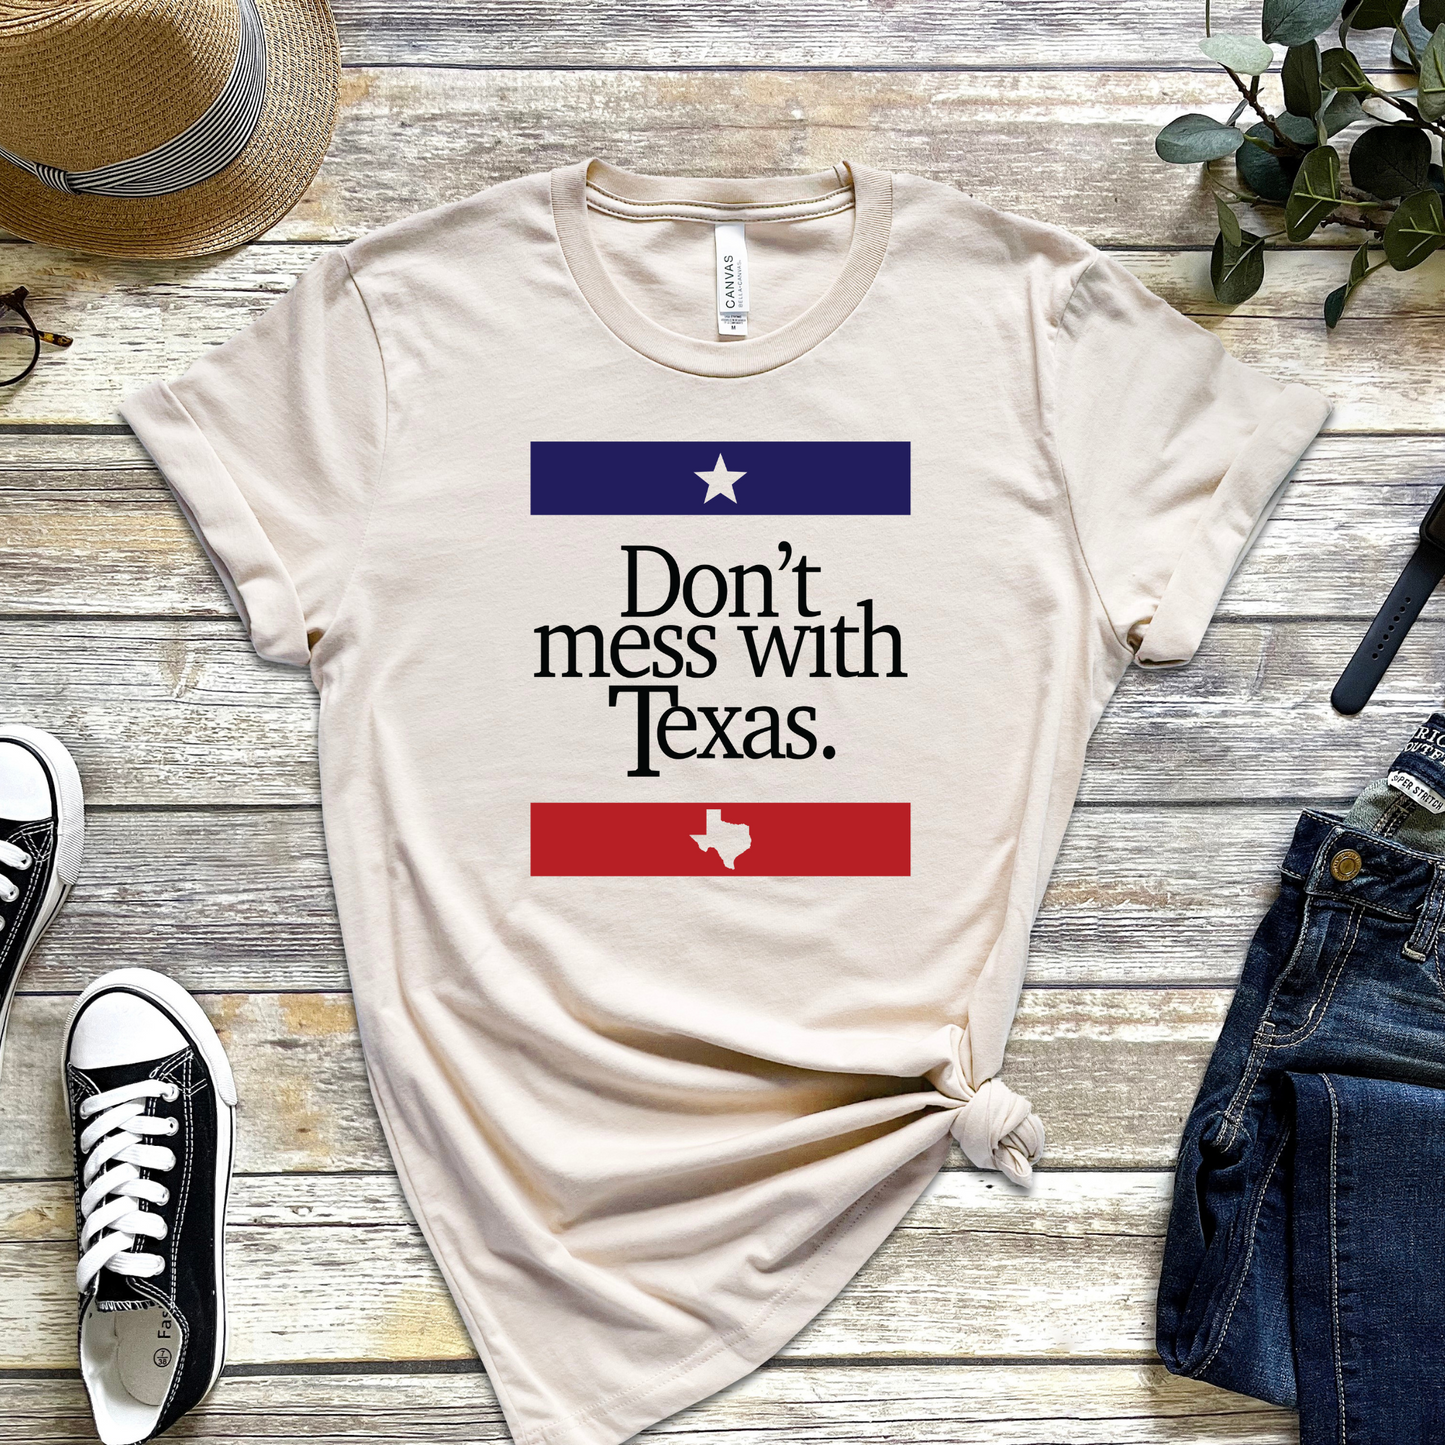 Don't Mess with Texas T-Shirt | Bold Texan Attitude in Stylish Apparel